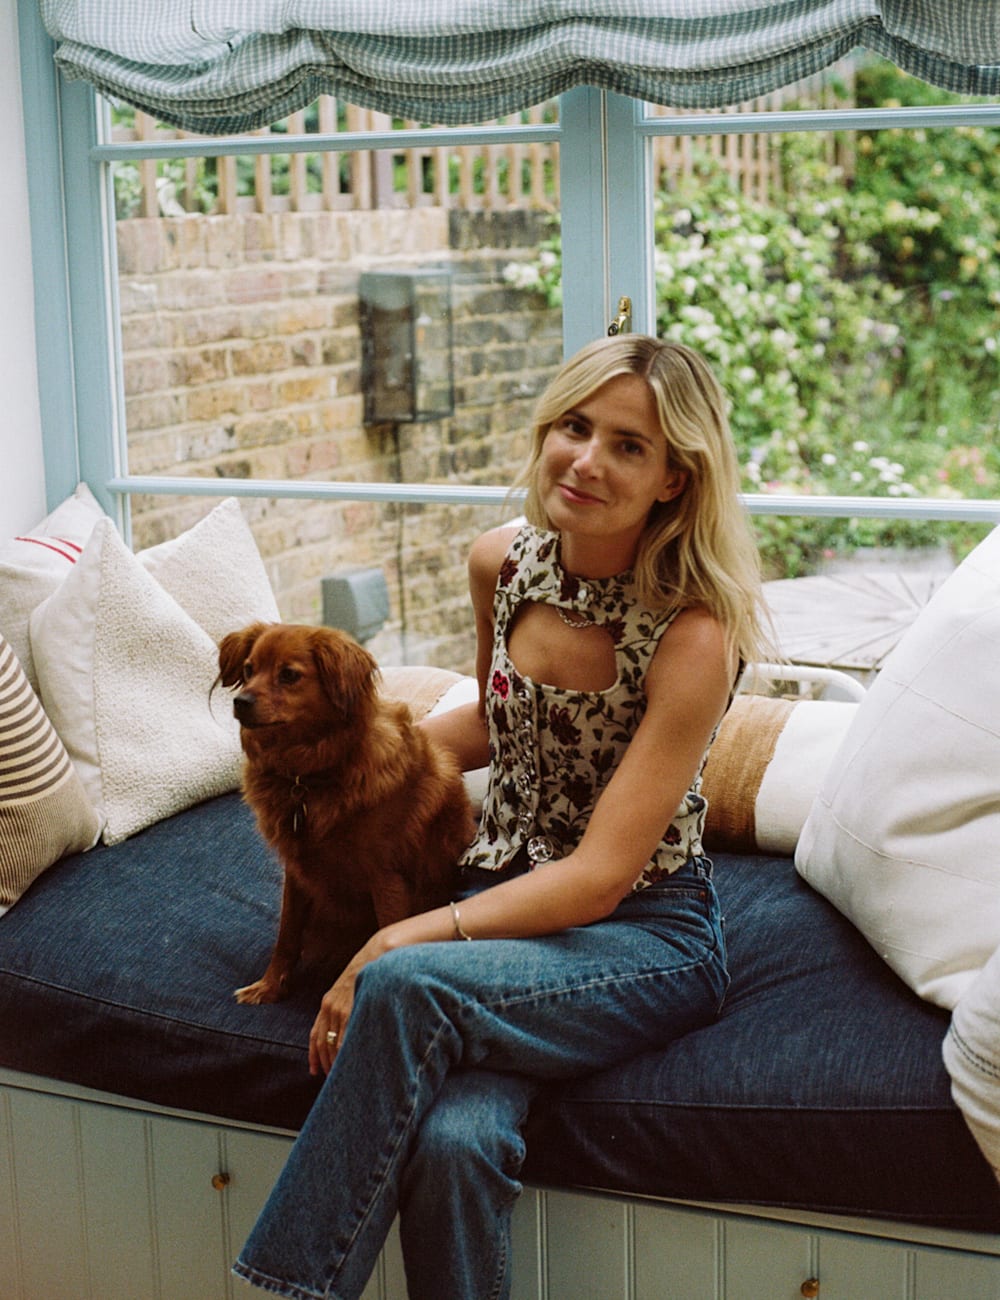 Lucy Williams and dog, Finn, at home in London by Hannah Dace for Mr & Mrs Smith